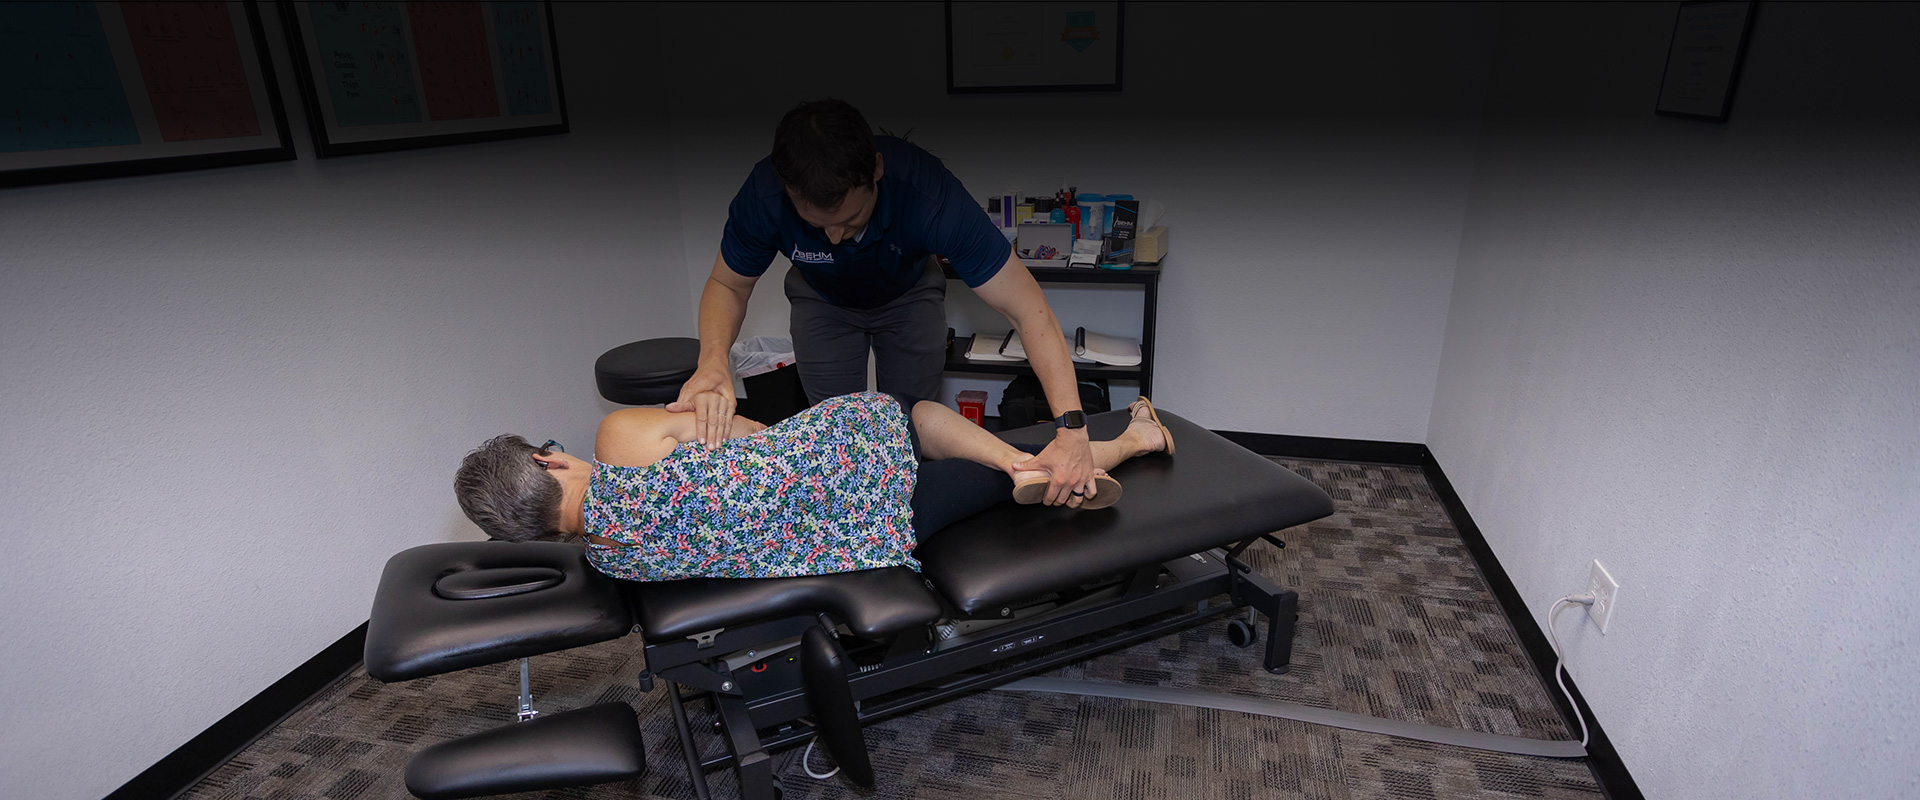 Traction Therapy - Reduces Spine Pressure and Back Pain